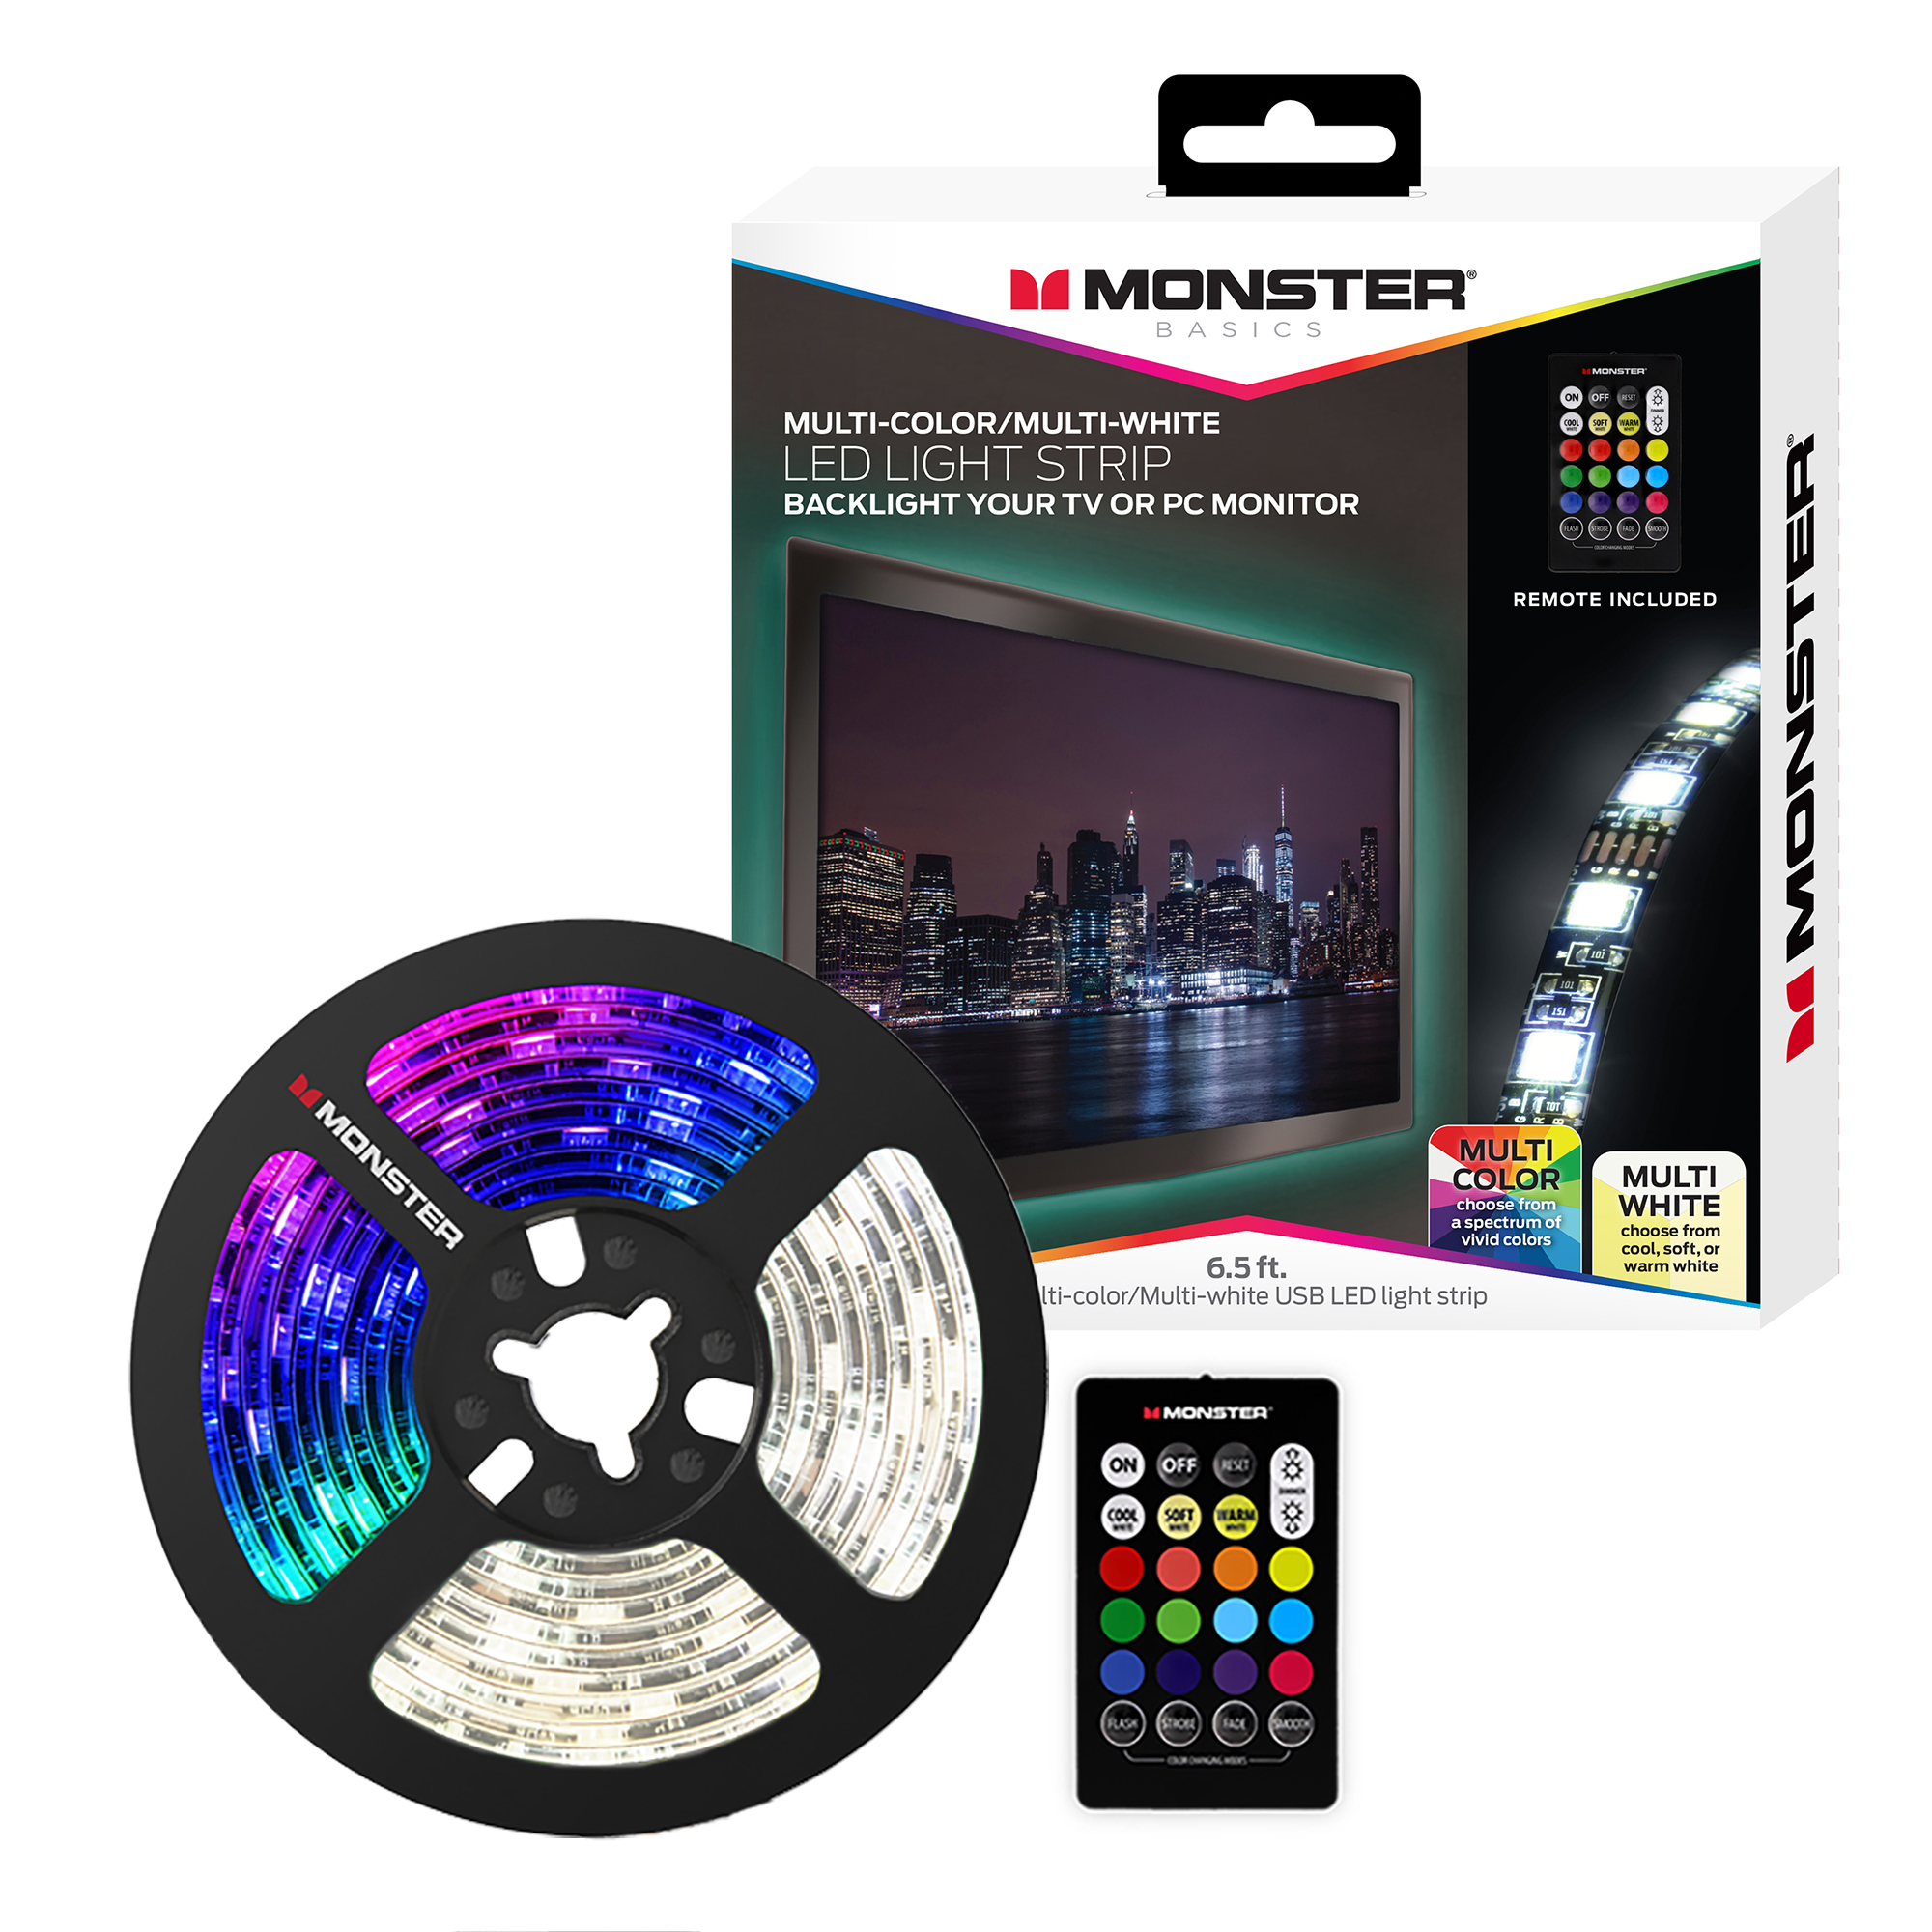 Portret Magnetisch min 6.5 ft Multi-Color and Multi-White LED Light Strip, Remote control -  Monster Illuminessence